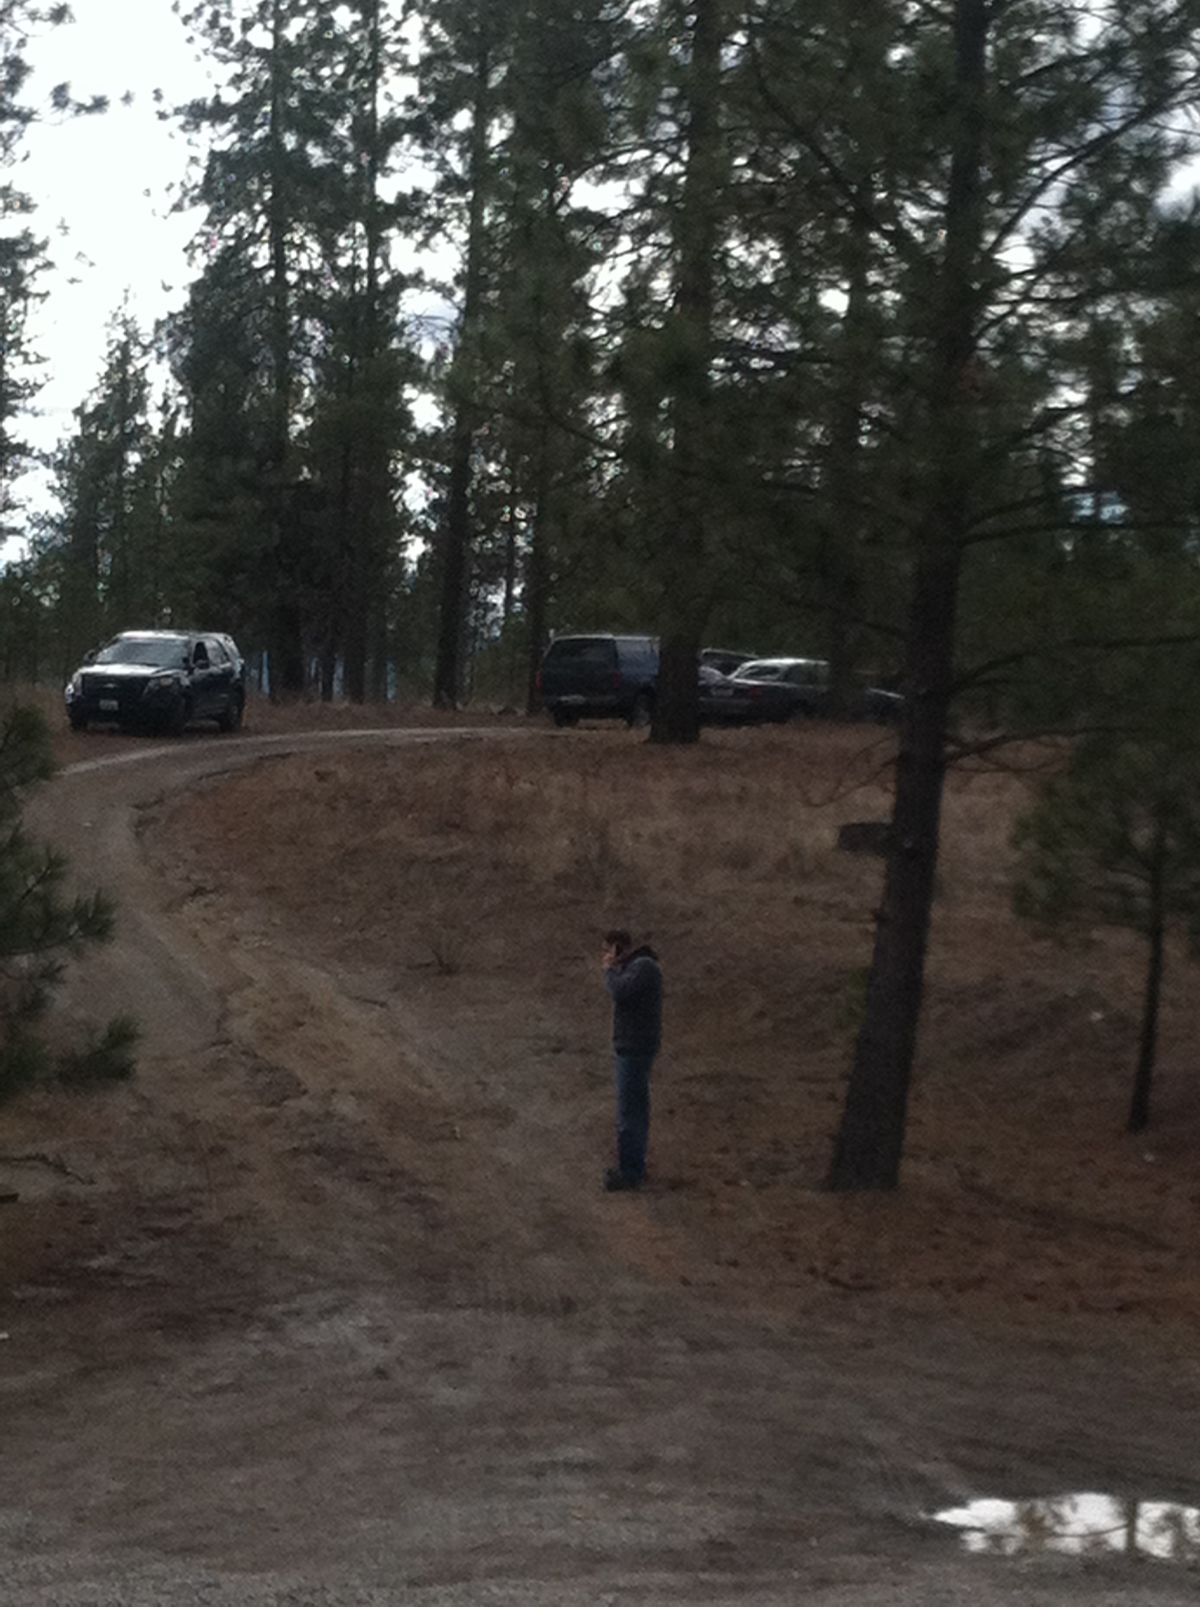 Spokane Police detectives are investigating a body found off Corkscrew Canyon Road north of Tum Tum on Marcy 7, 2014.  (Nina Culver)